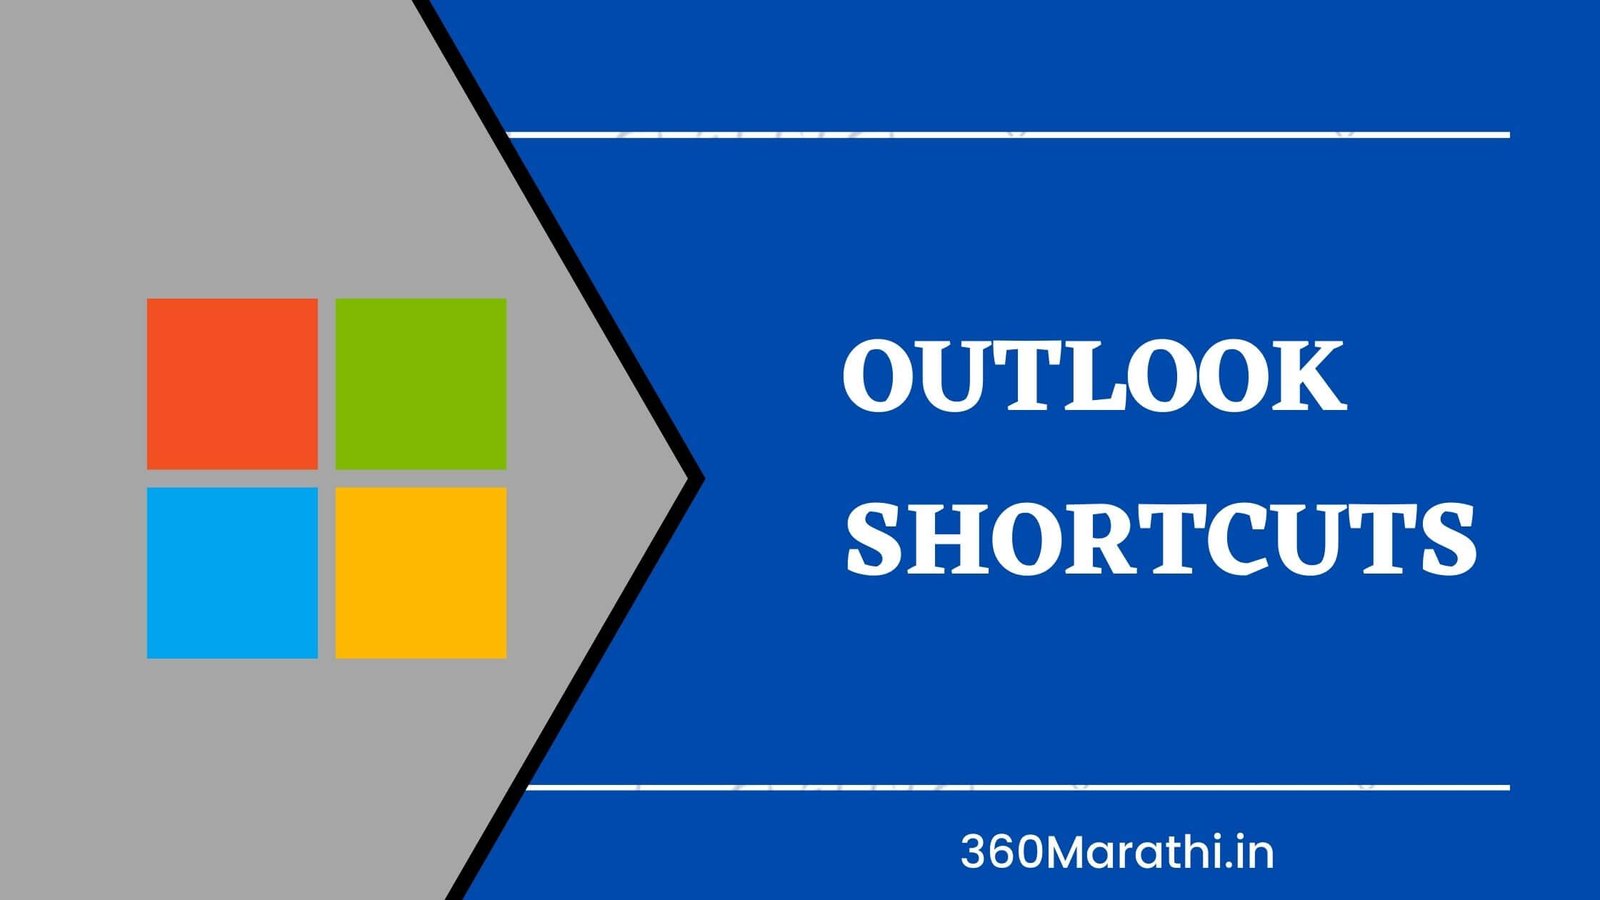 Outlook Shortcuts